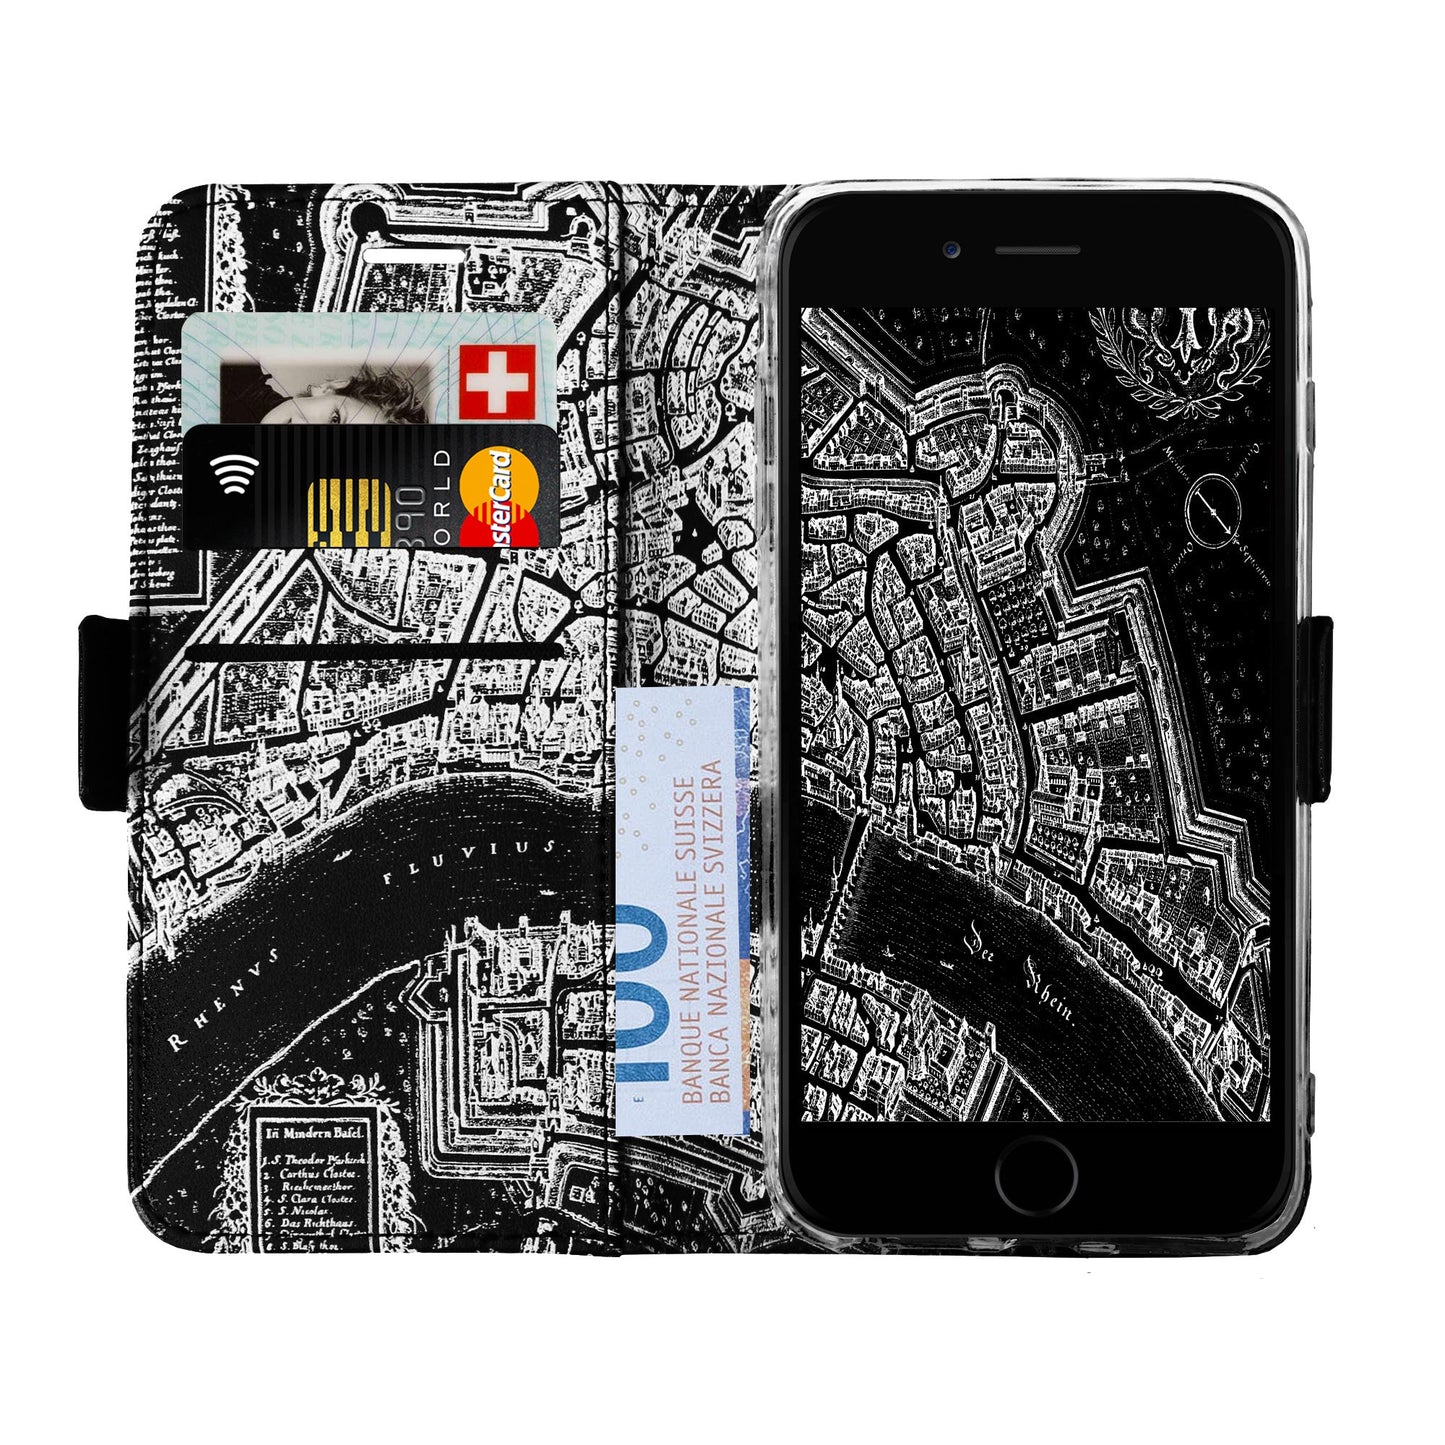 Basel Merian Negative Victor Case for iPhone 6/6S/7/8 Plus